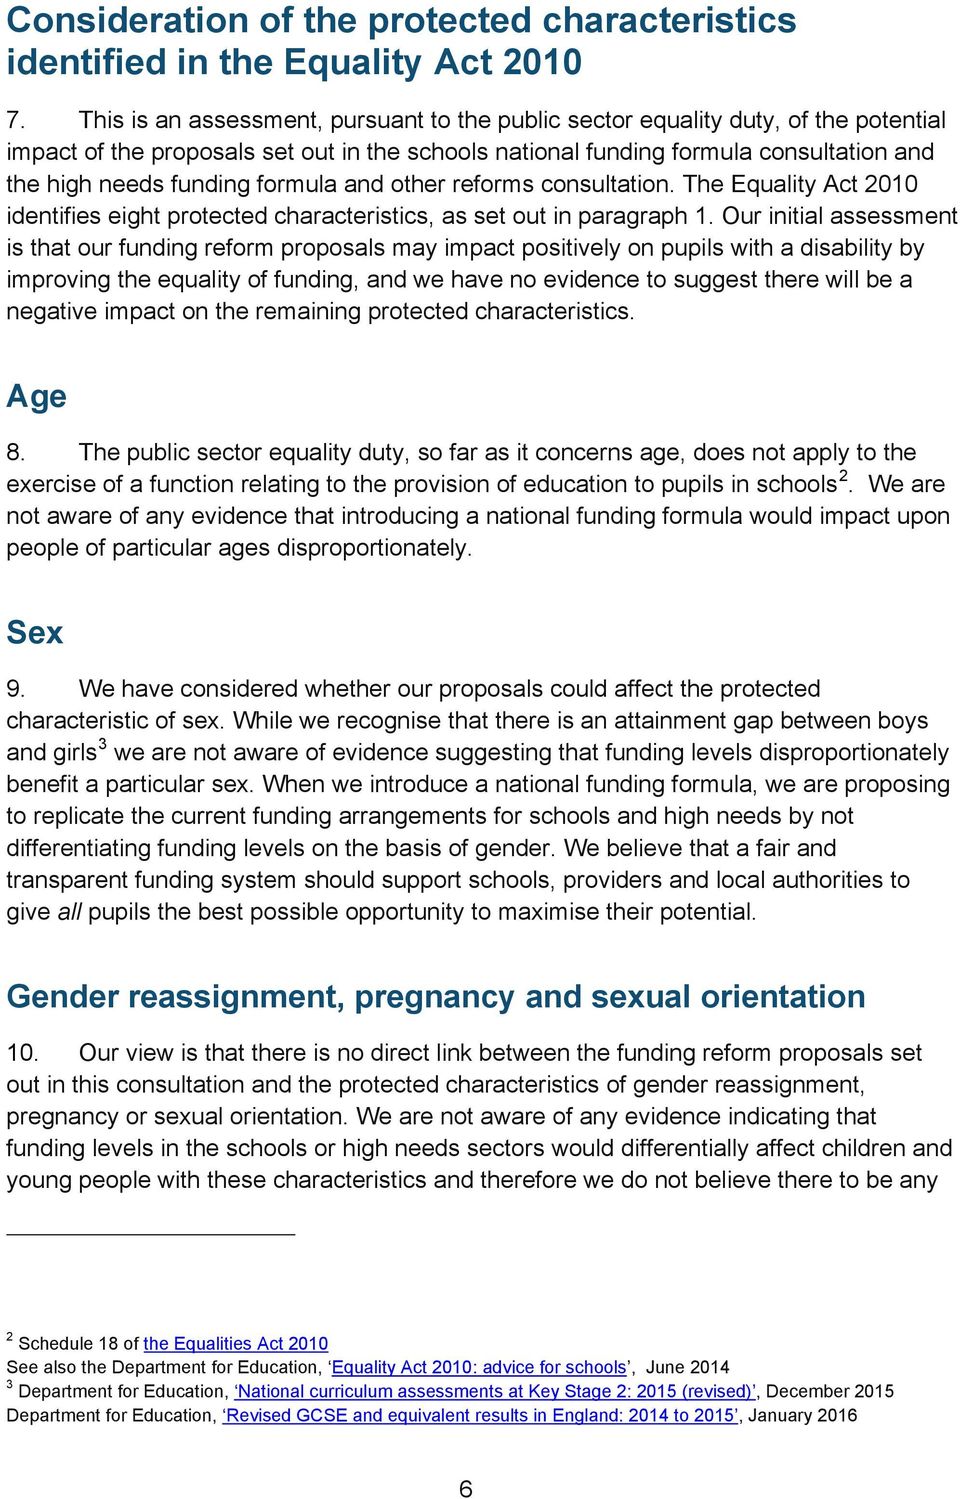 formula and other reforms consultation. The Equality Act 2010 identifies eight protected characteristics, as set out in paragraph 1.